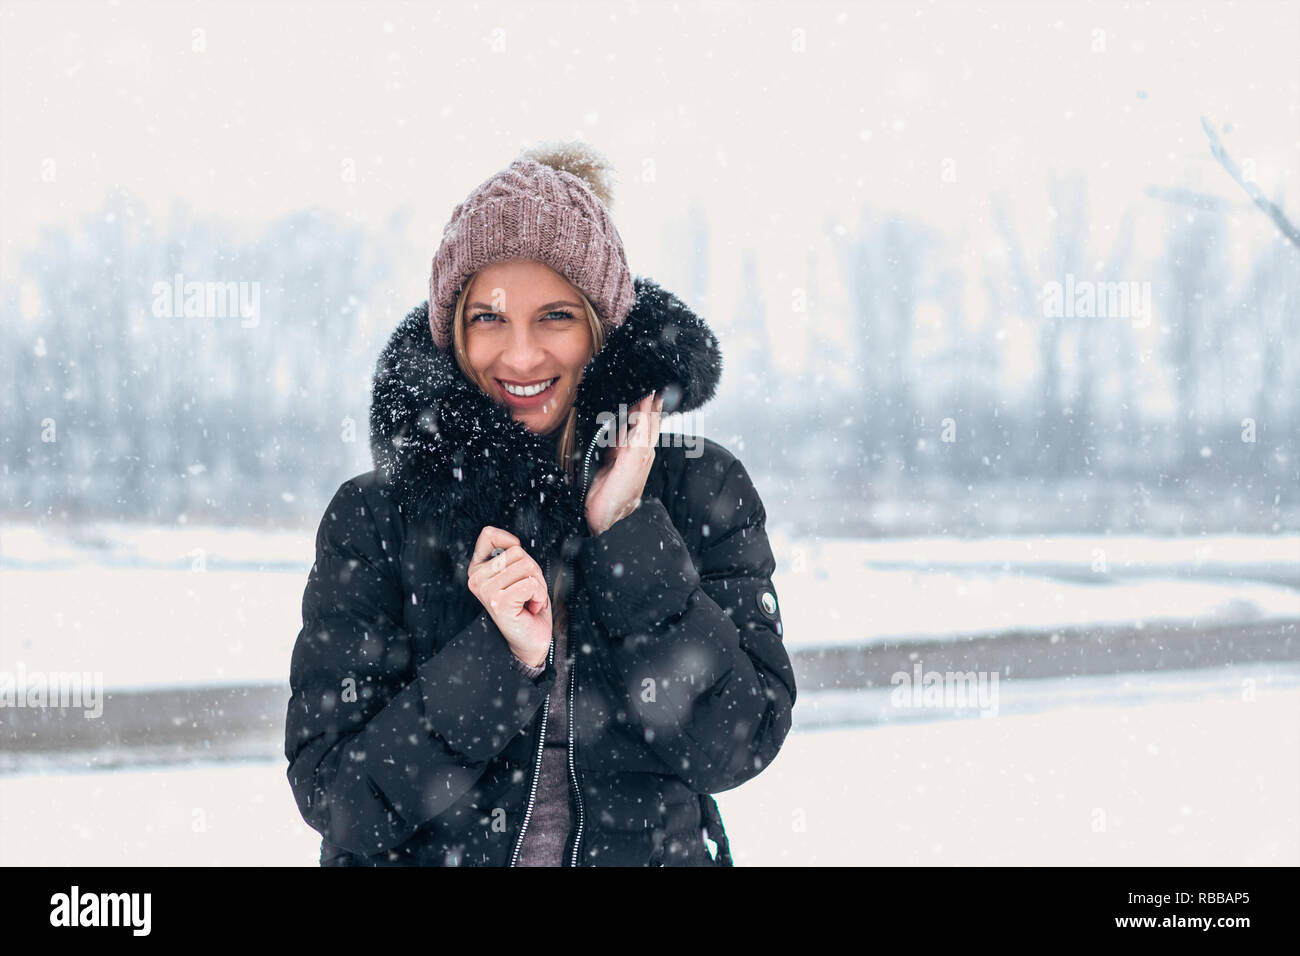 Cheerful woman outdoor in Winter cloathing Stock Photo - Alamy